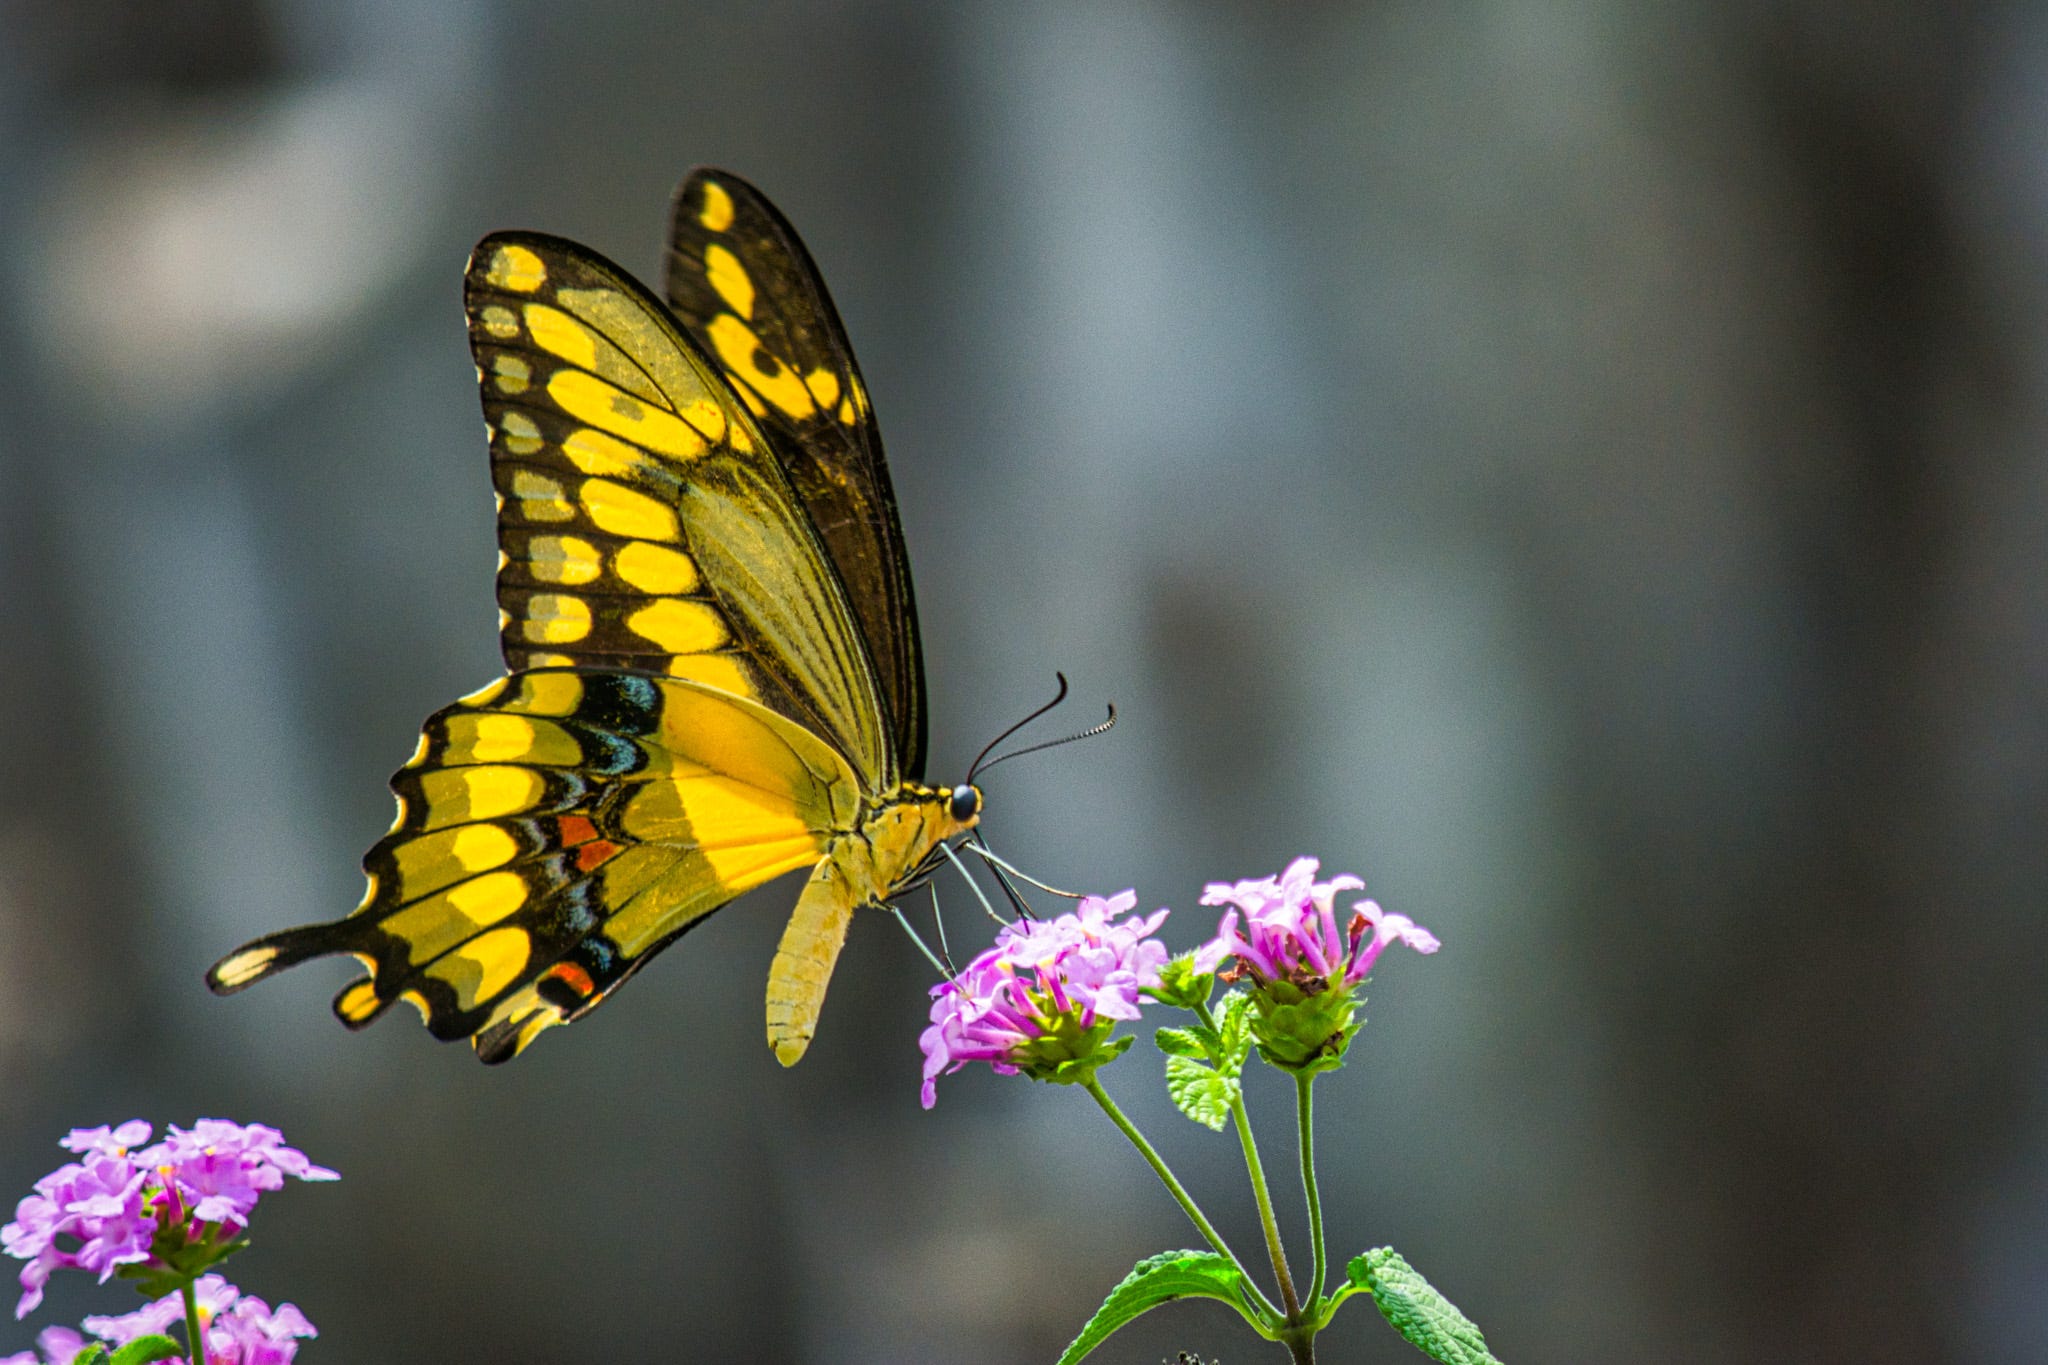 A Swallowtail Butterfly on purple lantana blooms against a blurred background